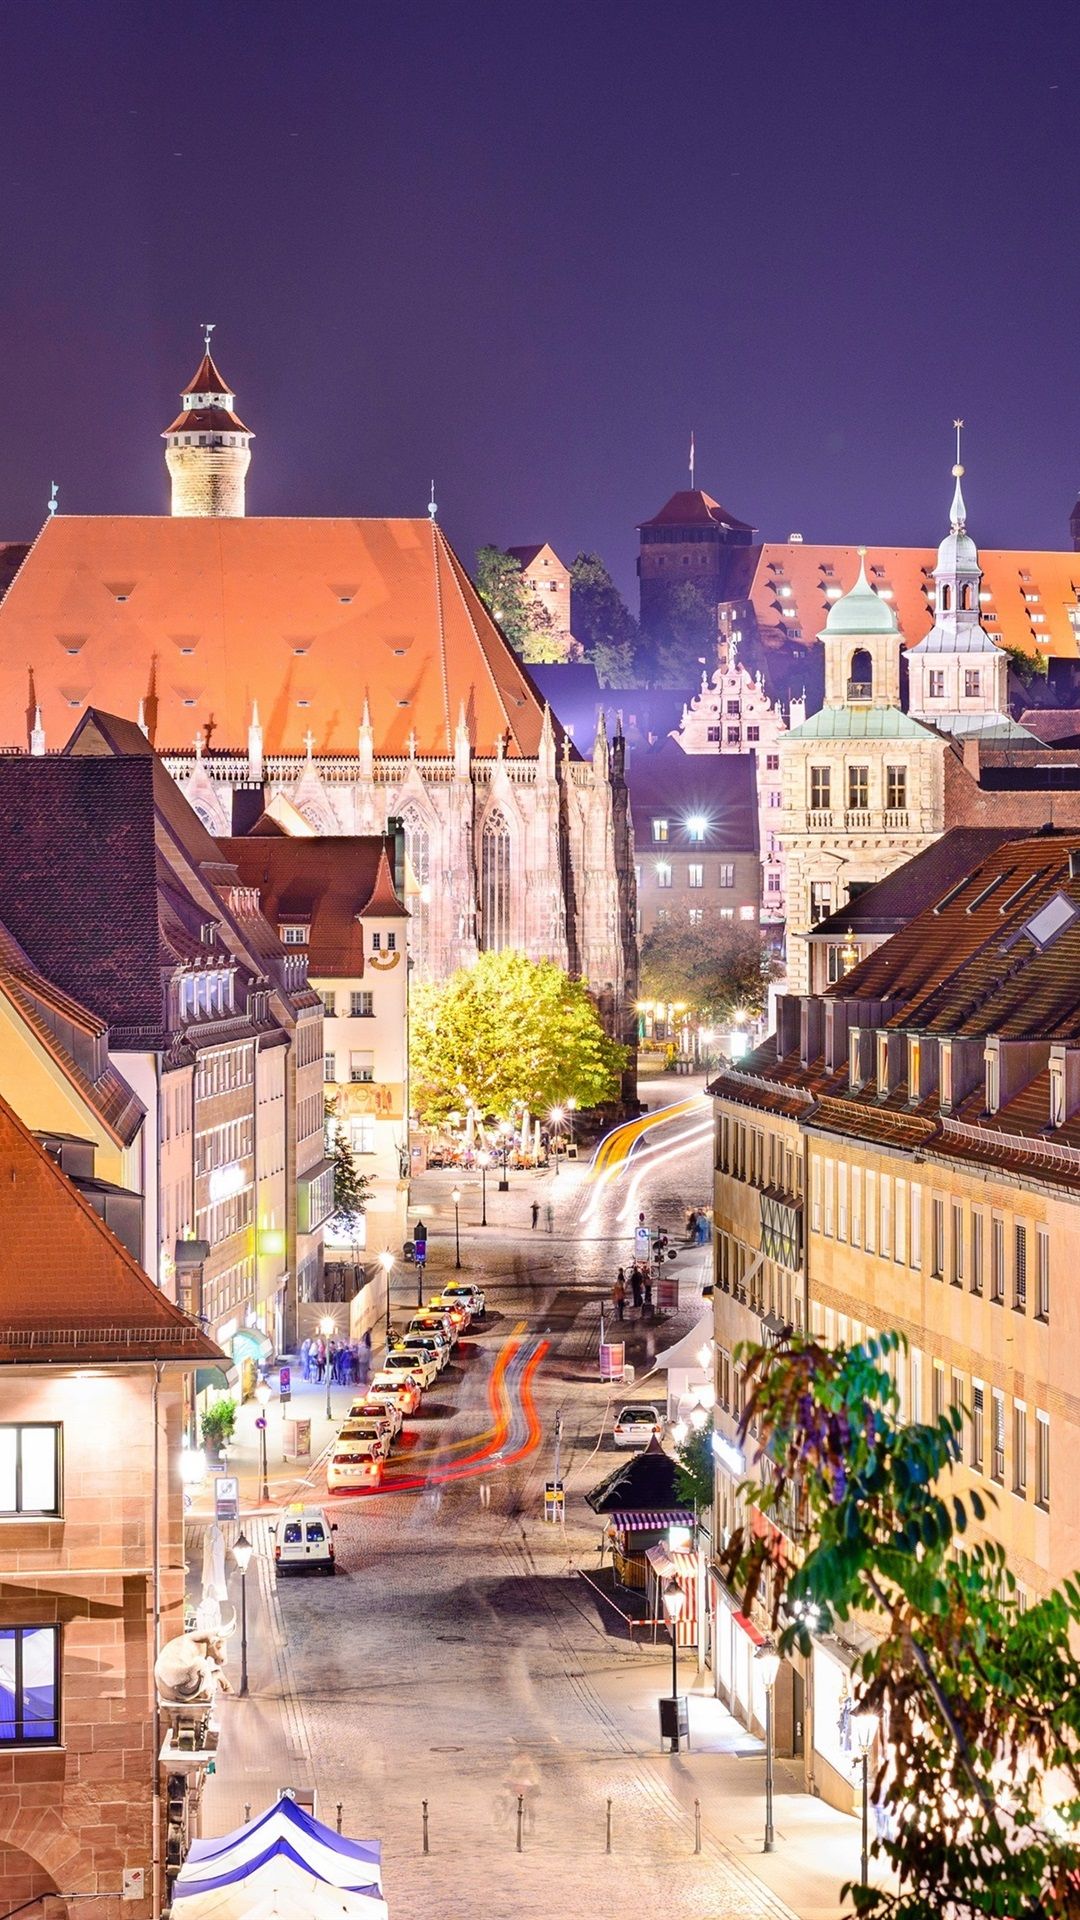 Germany, Nuremberg, City, Street, Houses, Lights, Night 1080x1920 IPhone 8 7 6 6S Plus Wallpaper, Background, Picture, Image